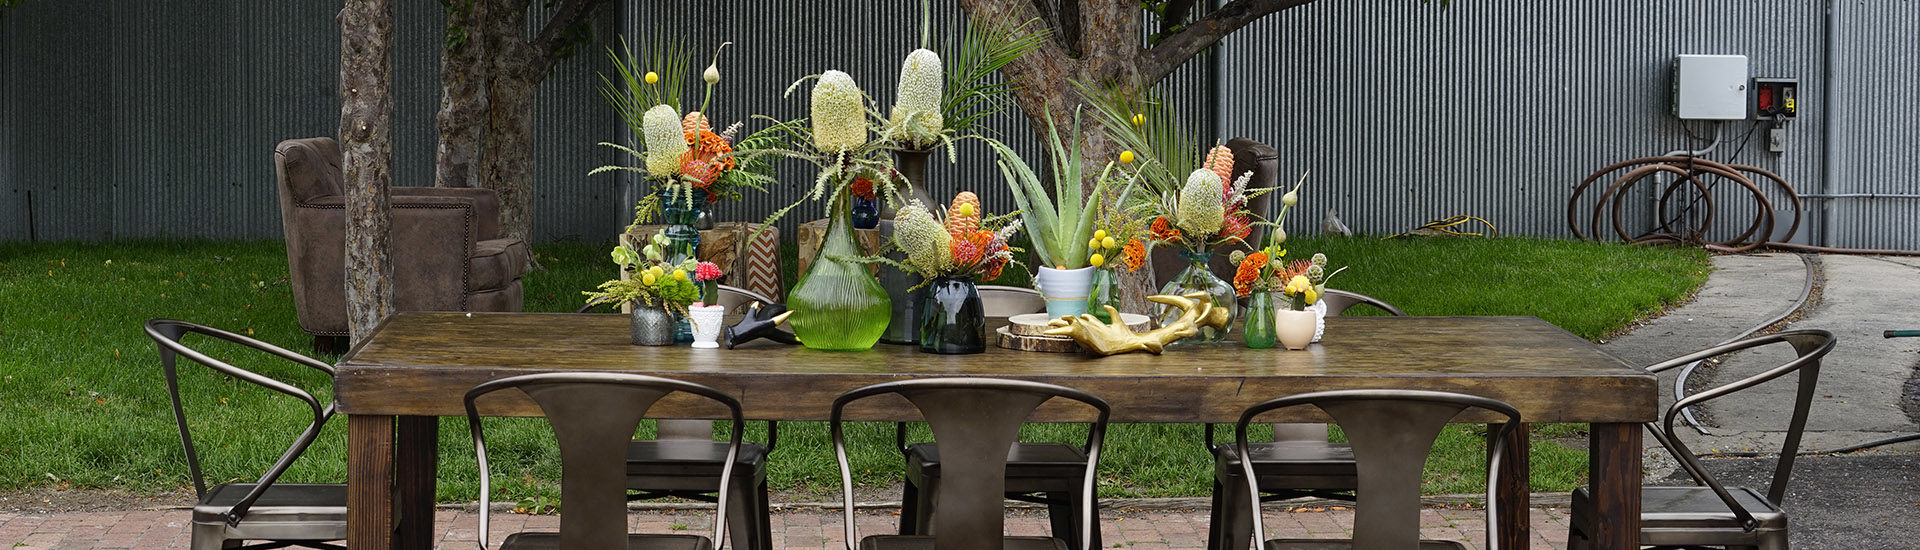 Long wooden table surrounded by metal chairs with a lot of florals in different colored vases at different heights